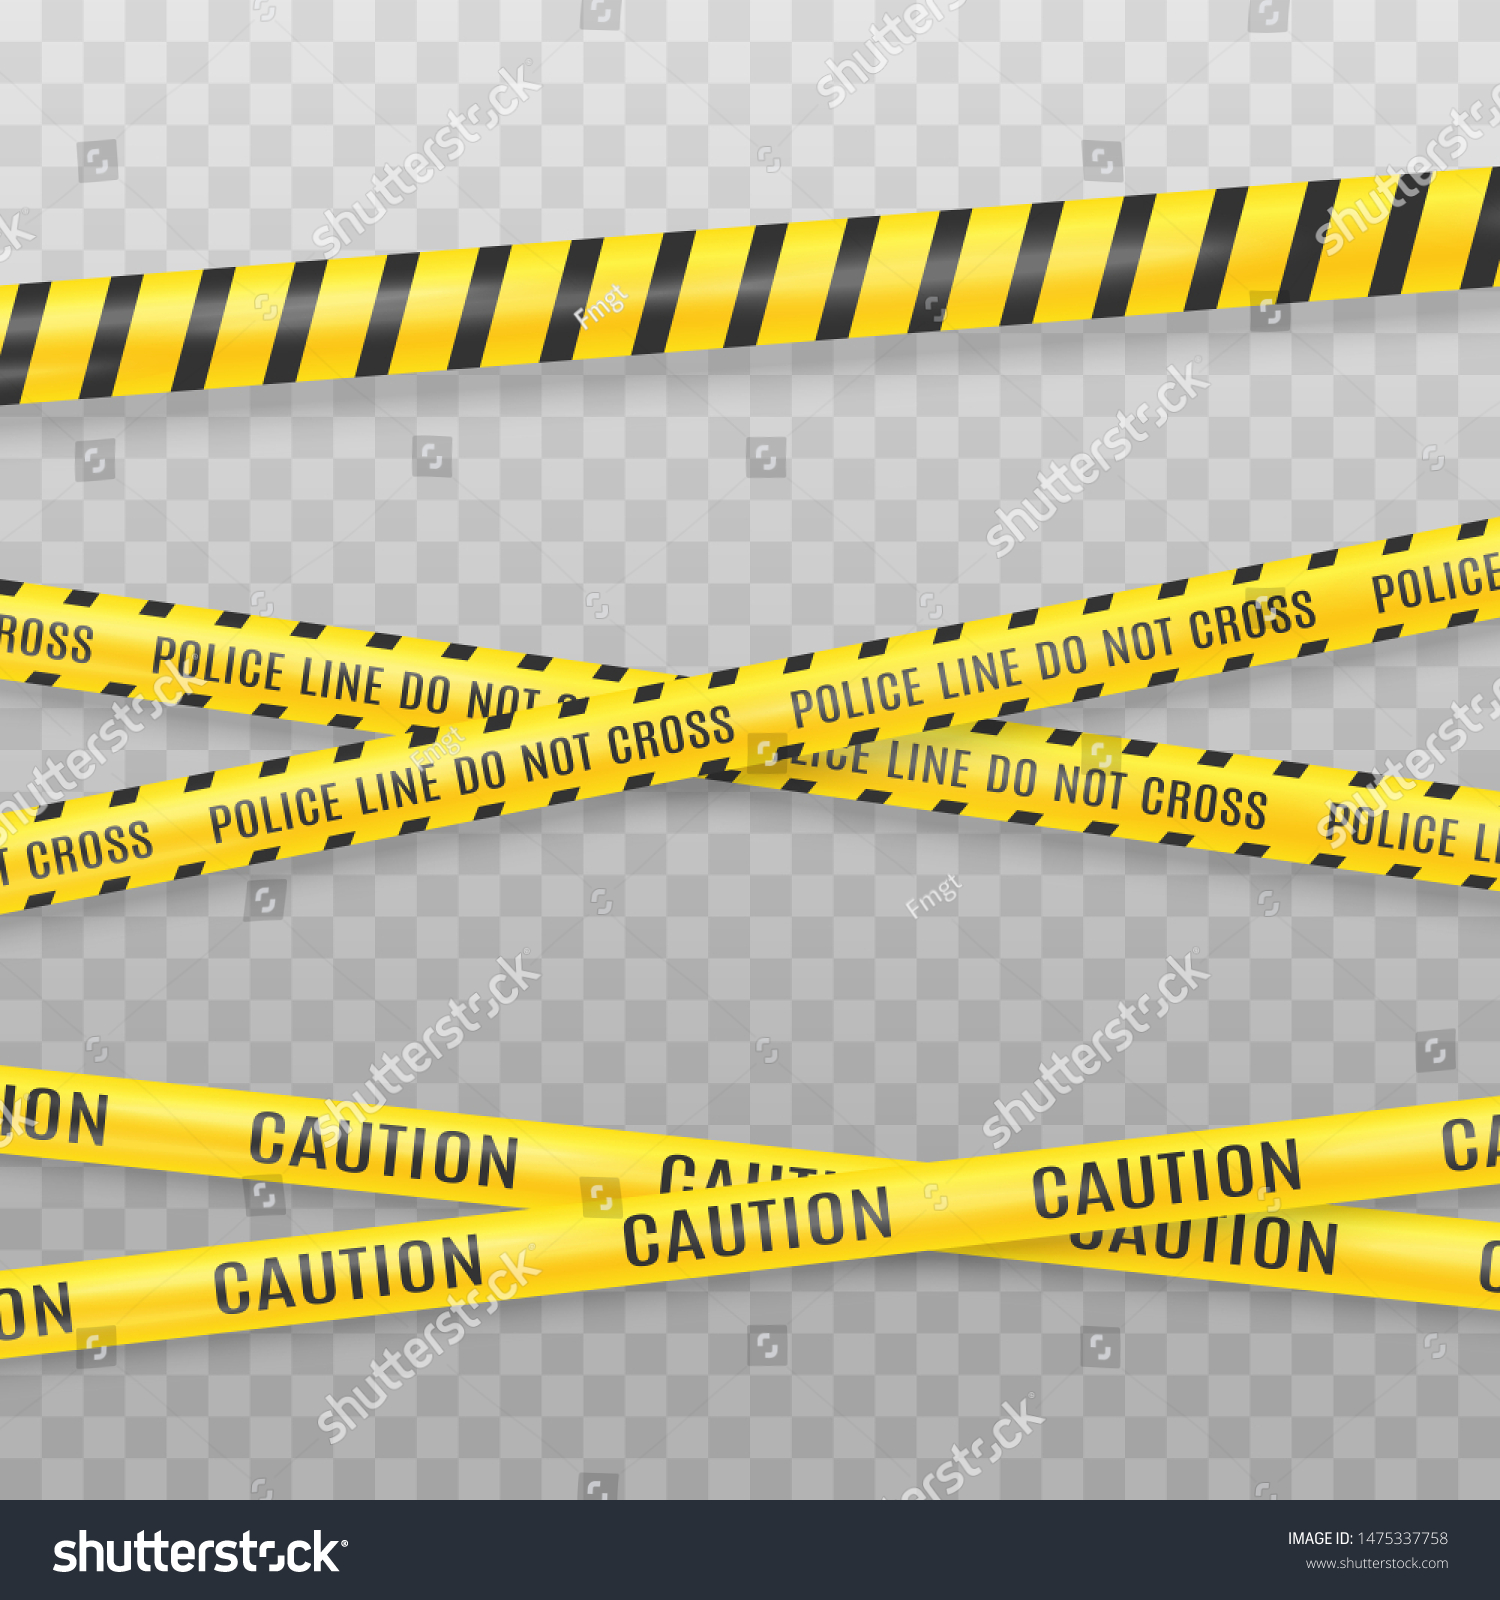 SVG of Yellow police tape isolated on transparent background. Crime scene tape vector illustration. Danger zone designation. Vector illustration svg